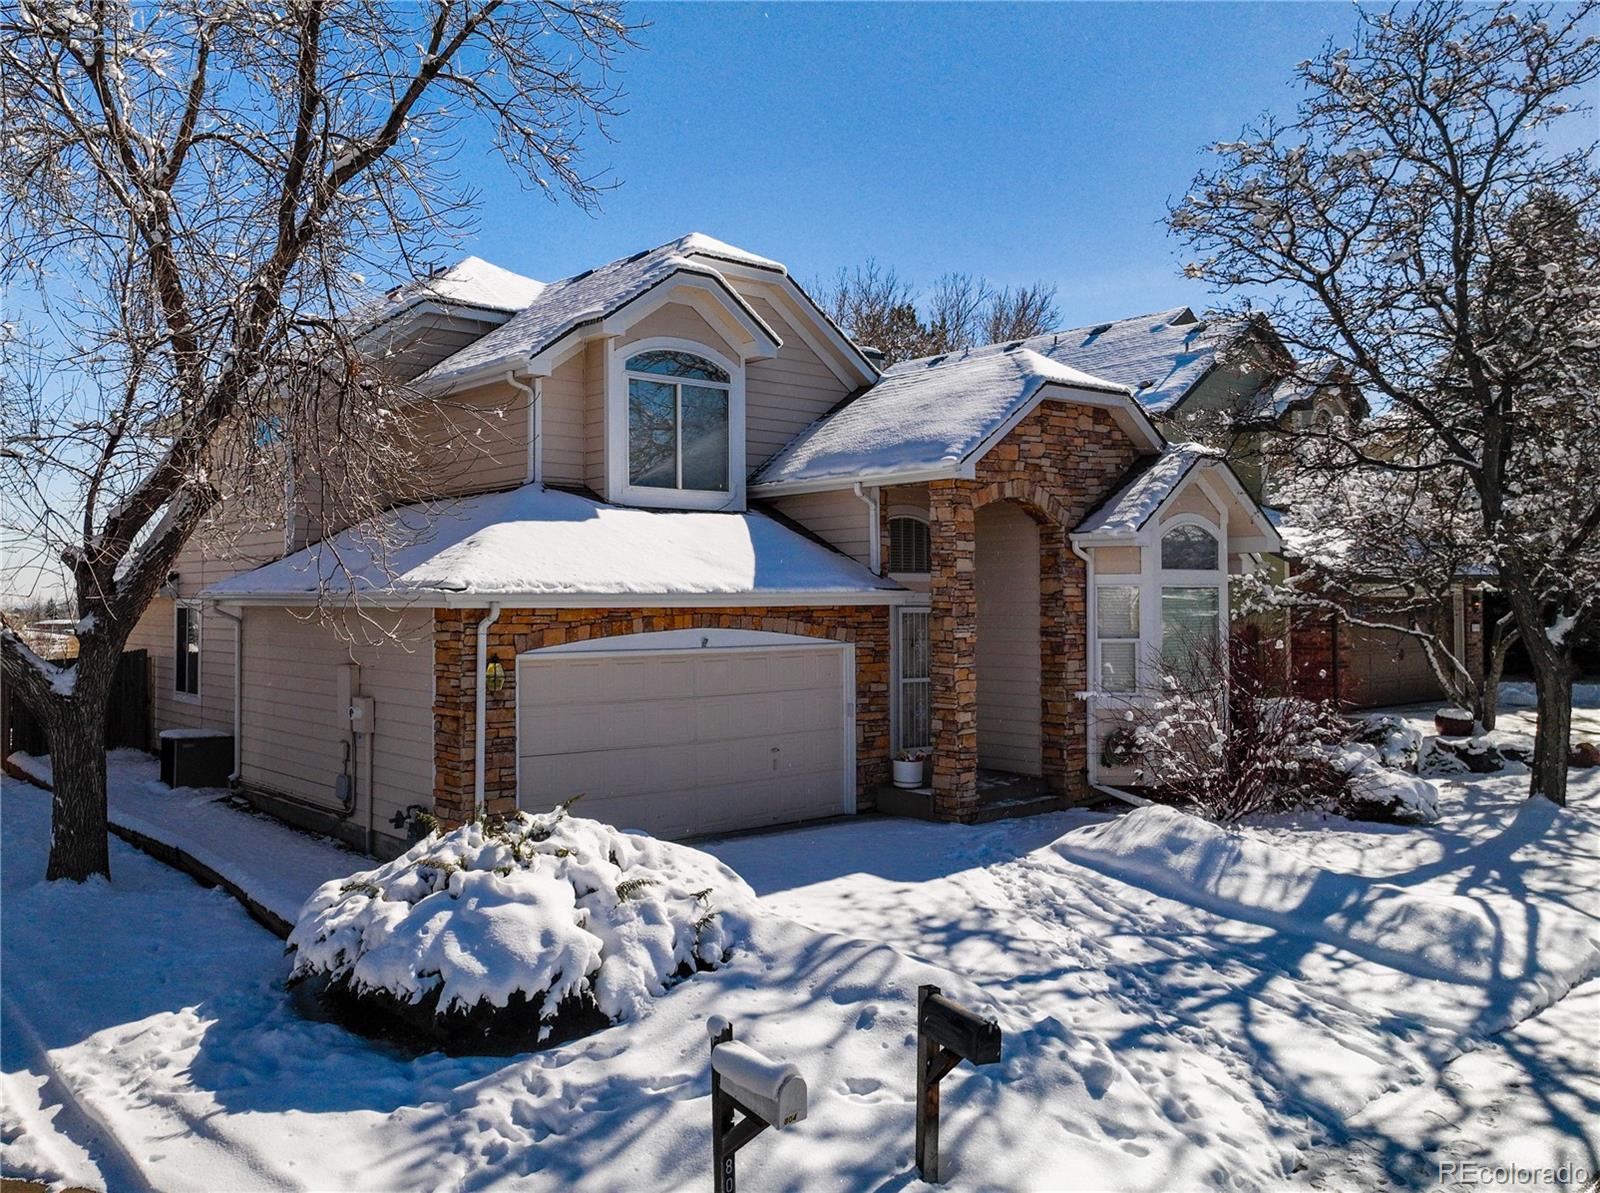 Report Image for 8042 W 78th Circle,Arvada, Colorado